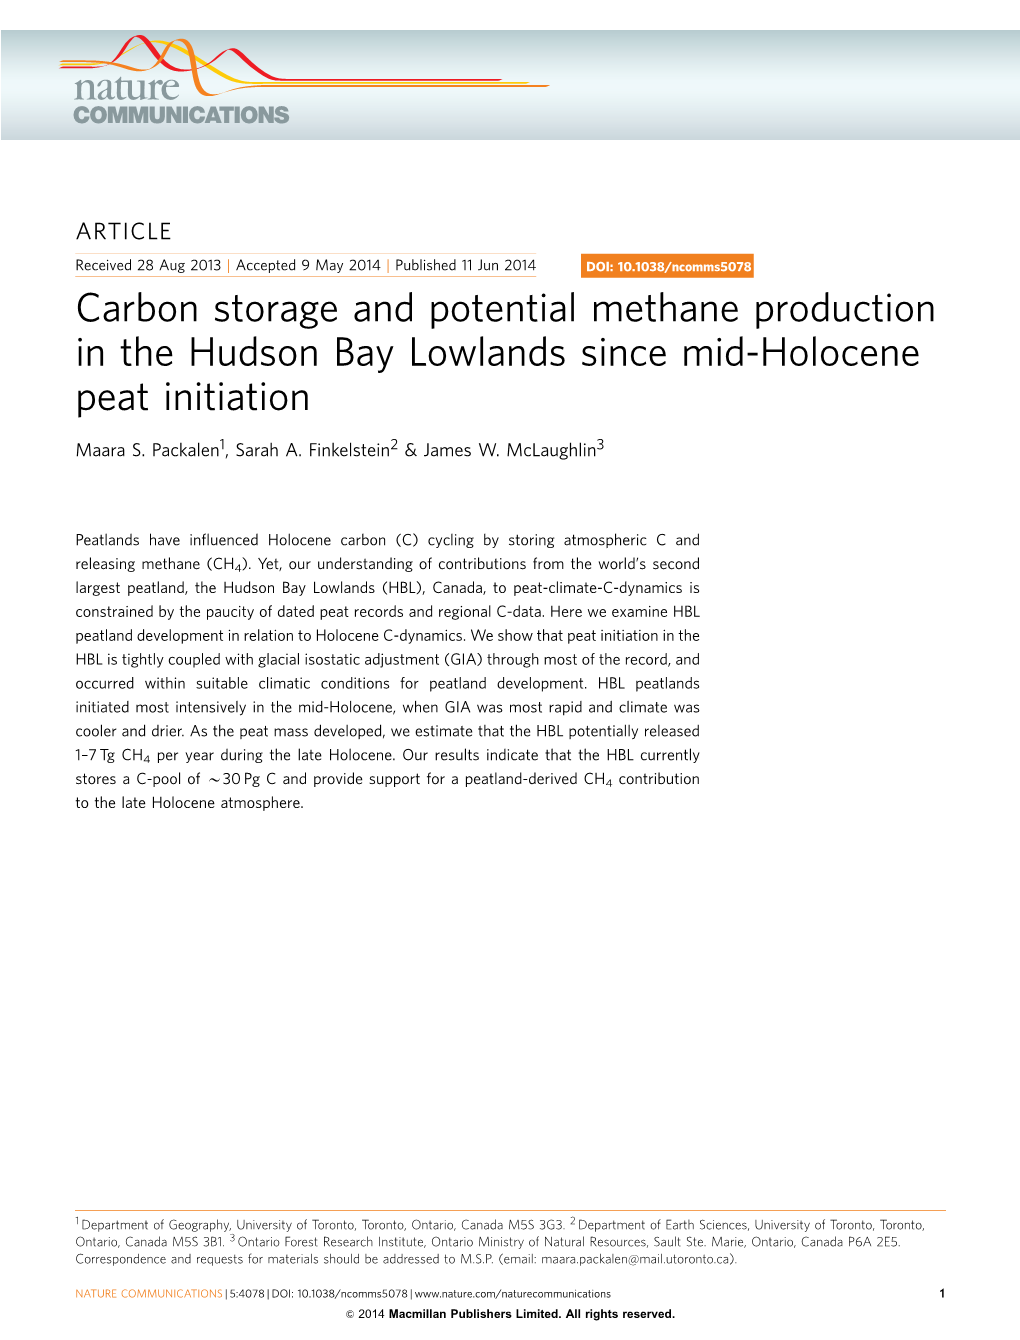 Carbon Storage and Potential Methane Production in the Hudson Bay Lowlands Since Mid-Holocene Peat Initiation